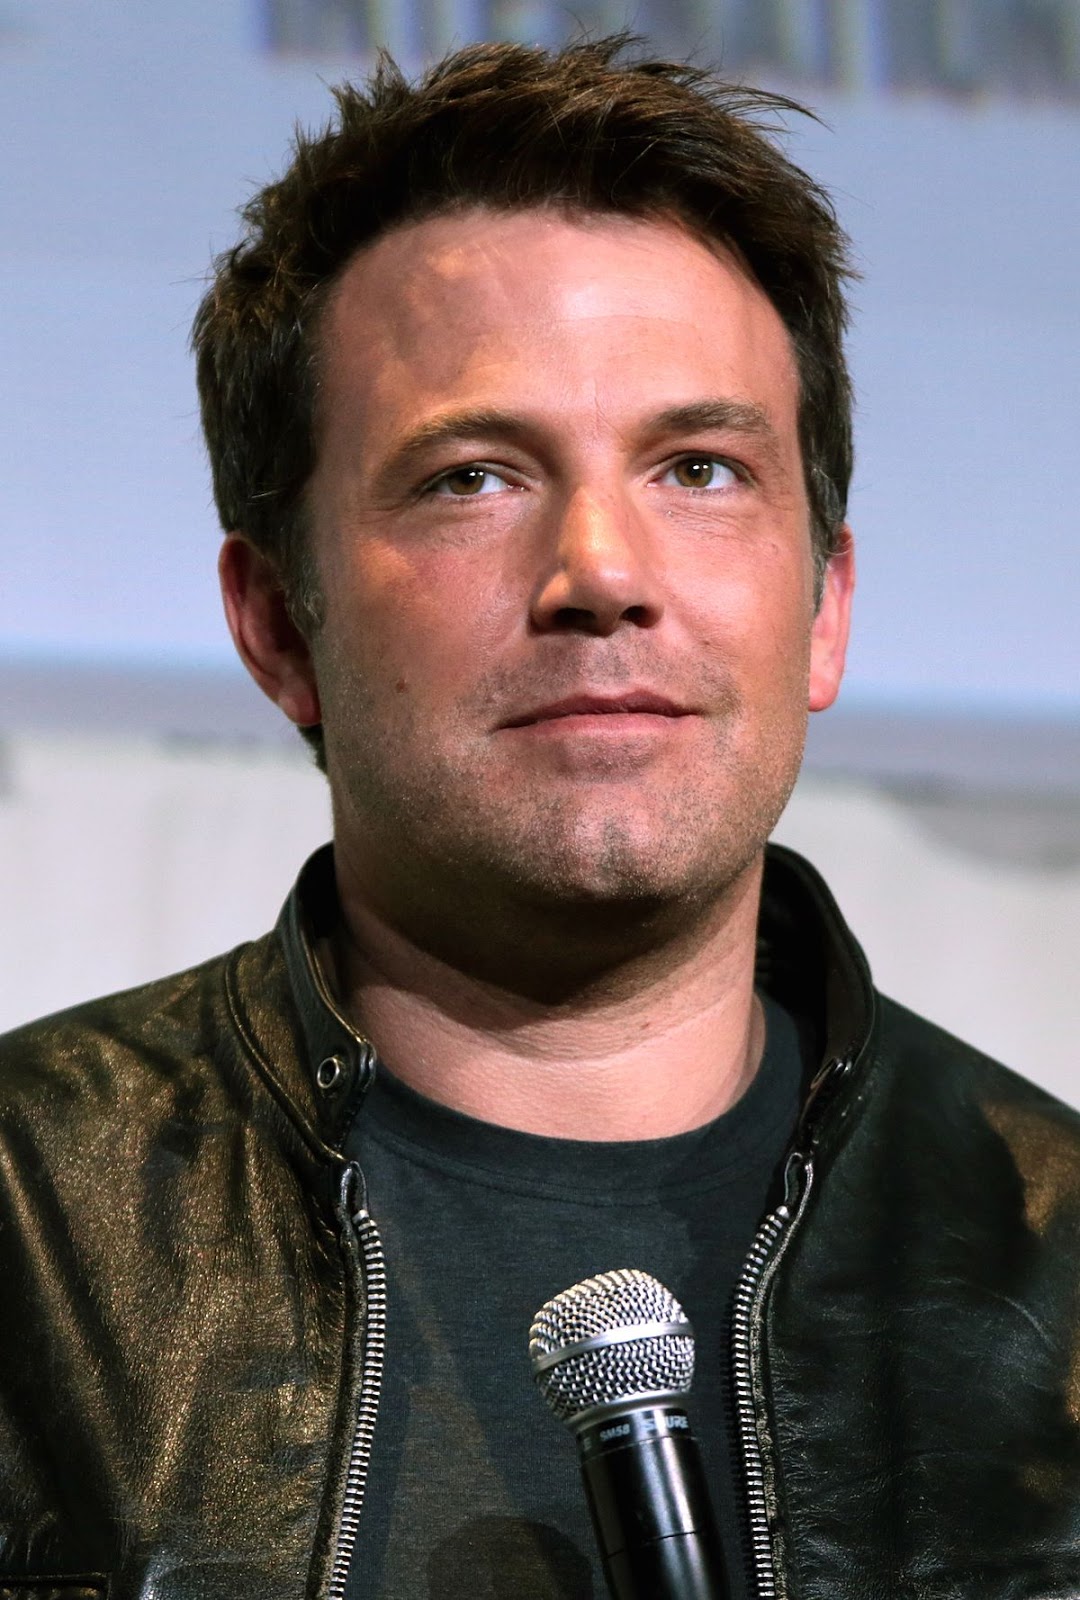 Top 22 Ben Affleck HD Images, Photos And Pictures ...